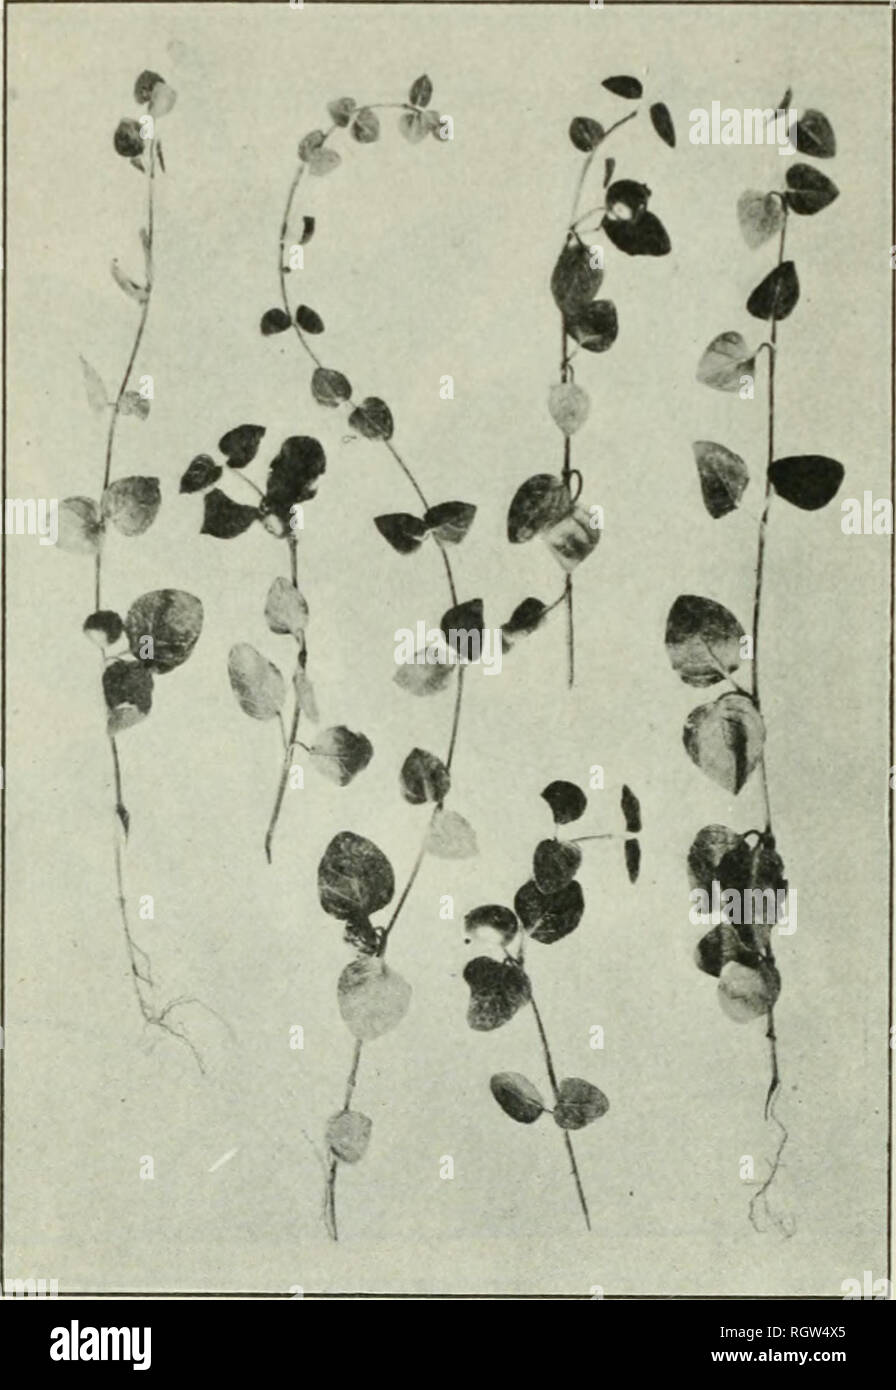 . Bulletin. 1901-13. Agriculture; Agriculture. 34 AMERICAN MKDICINAI, T.PLWKS ANM) HKRBS. SQUAW VINE. Mitchella repens L. Other common names.—Checkorbcrry, partridjicbcrry, docrbrrry, hive vine, sqiiaw- borry, fwinberry, rhickeiibcrry, rnwborry, boxborry, fuxbcrry, ])artridp;e vine, winter clover, wild running box, one berry, pipeonberry, snakeberry, two-eyed ber- ry, pquaw-plum. Habitat and range.—The squaw vine is common in woods from Nova Scotia to Minnesota and south to Florida and Arkansas, where it is generally found creeping about the bases of trees. Description.—This slen- der, creepin Stock Photo